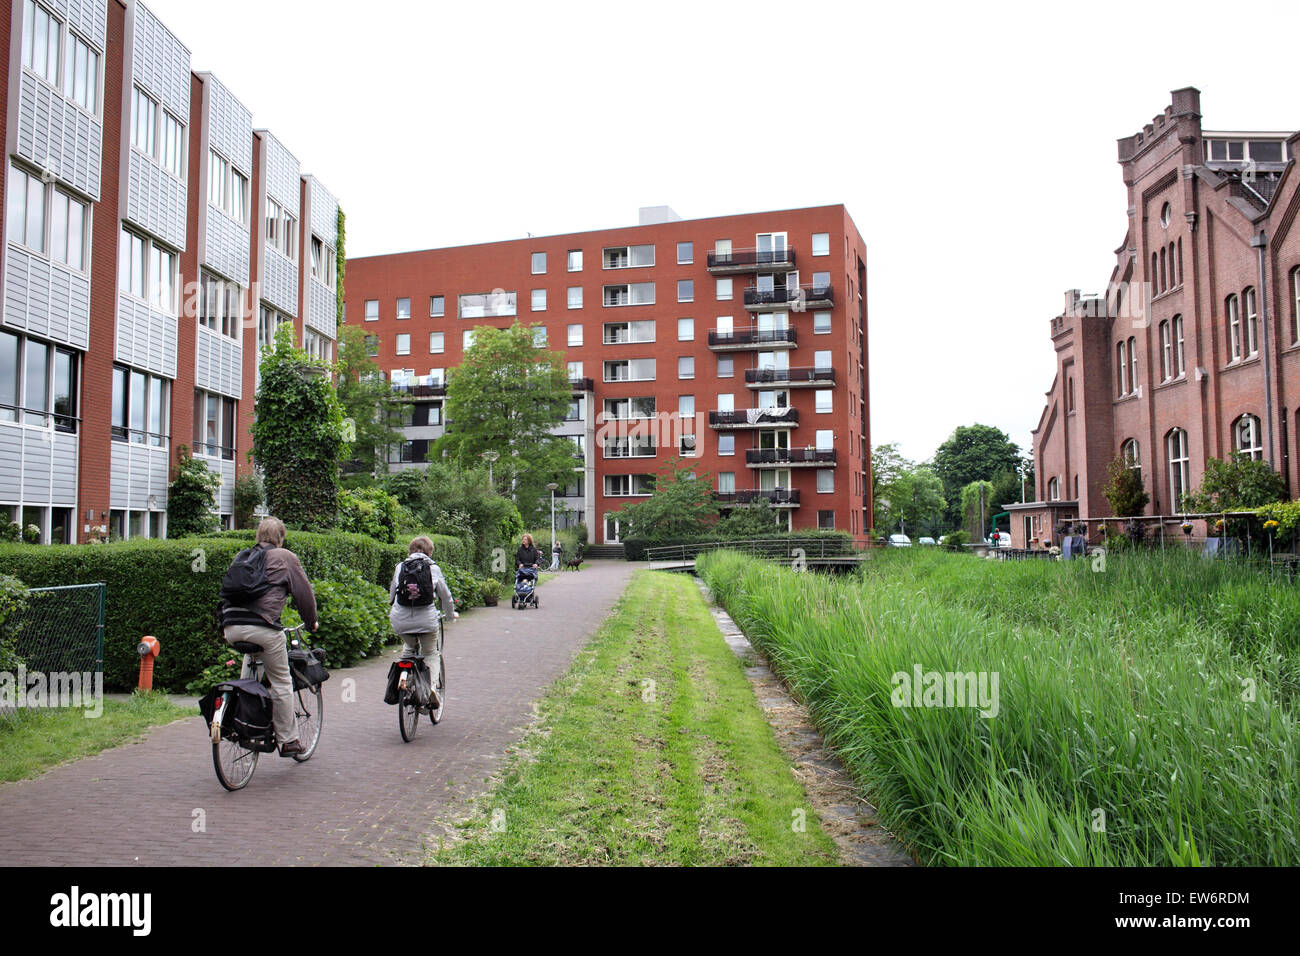 A pedestrian and cycle route in GWL-terrein, a car-free housing development in Amsterdam. Stock Photo